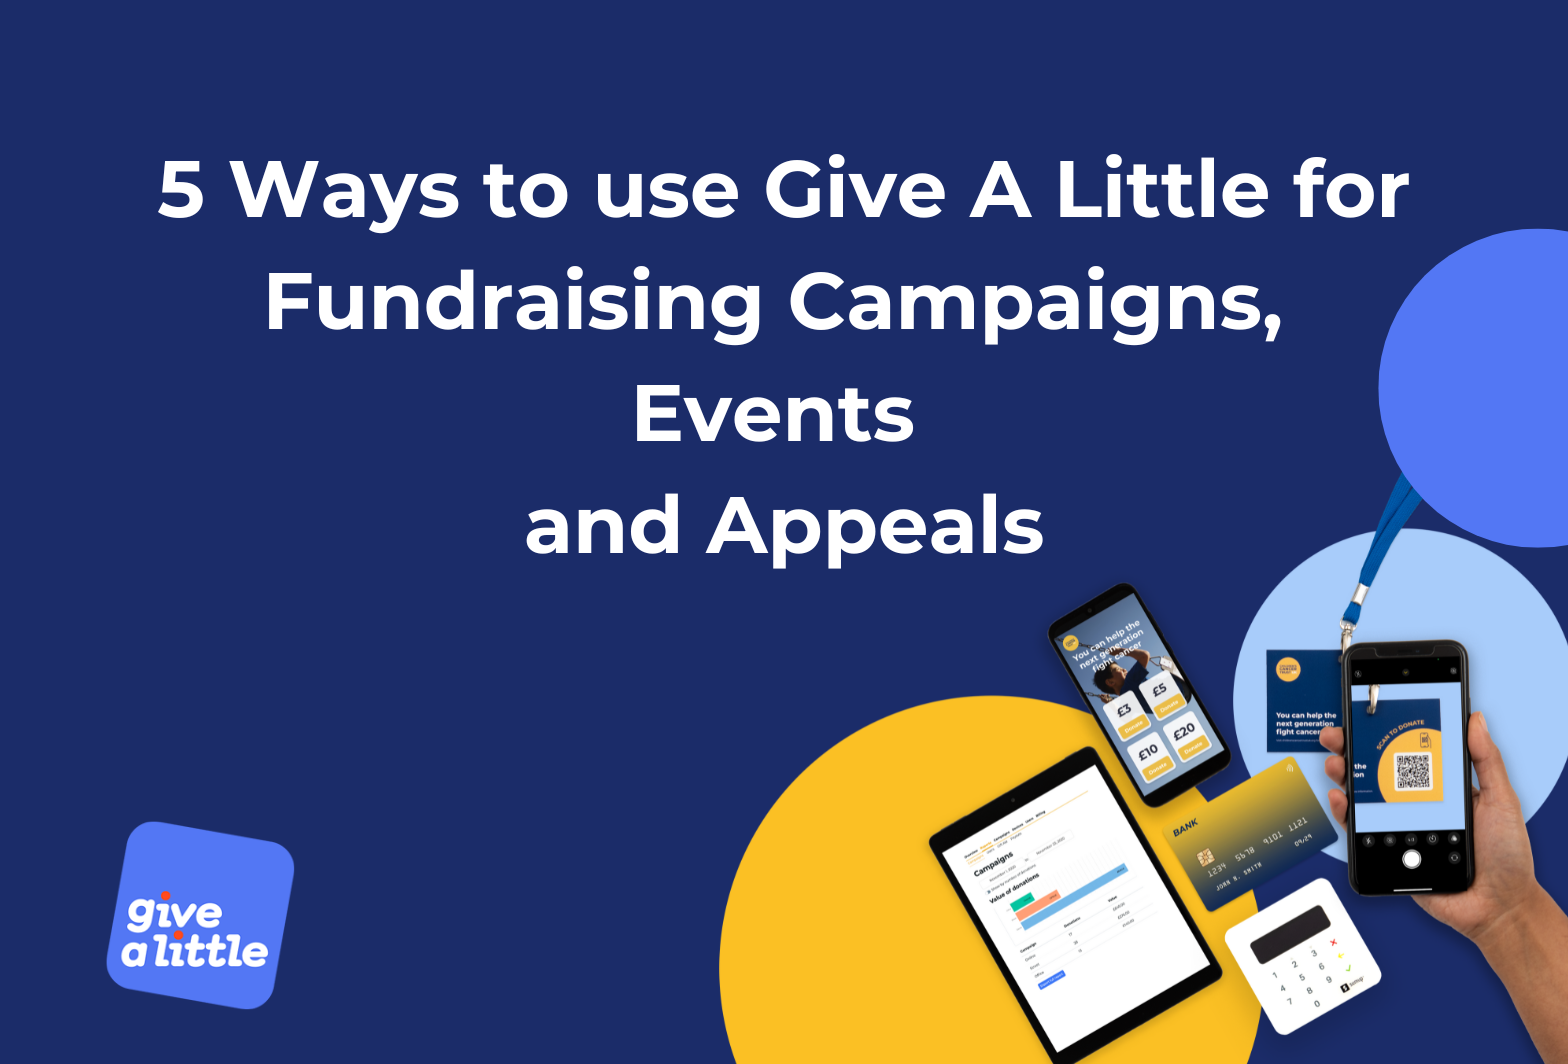 How to use Give A Little for Fundraising Campaigns, Events and Appeals graphic\n